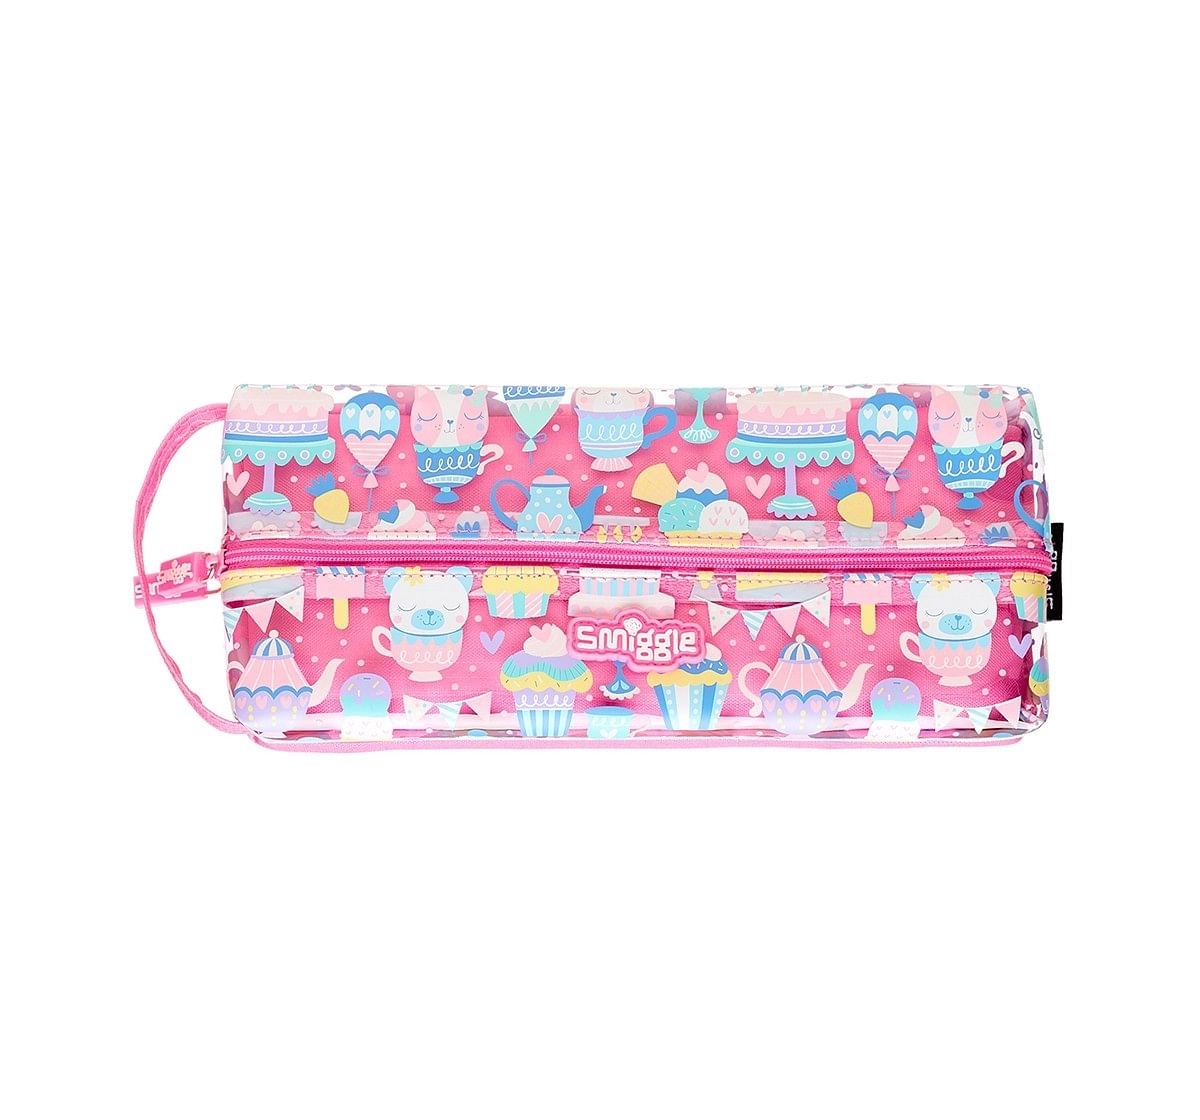 Smiggle Whirl Junior Flip Zip Pencil Case - Ice-cream Print Bags for Kids age 3Y+ (Pink)